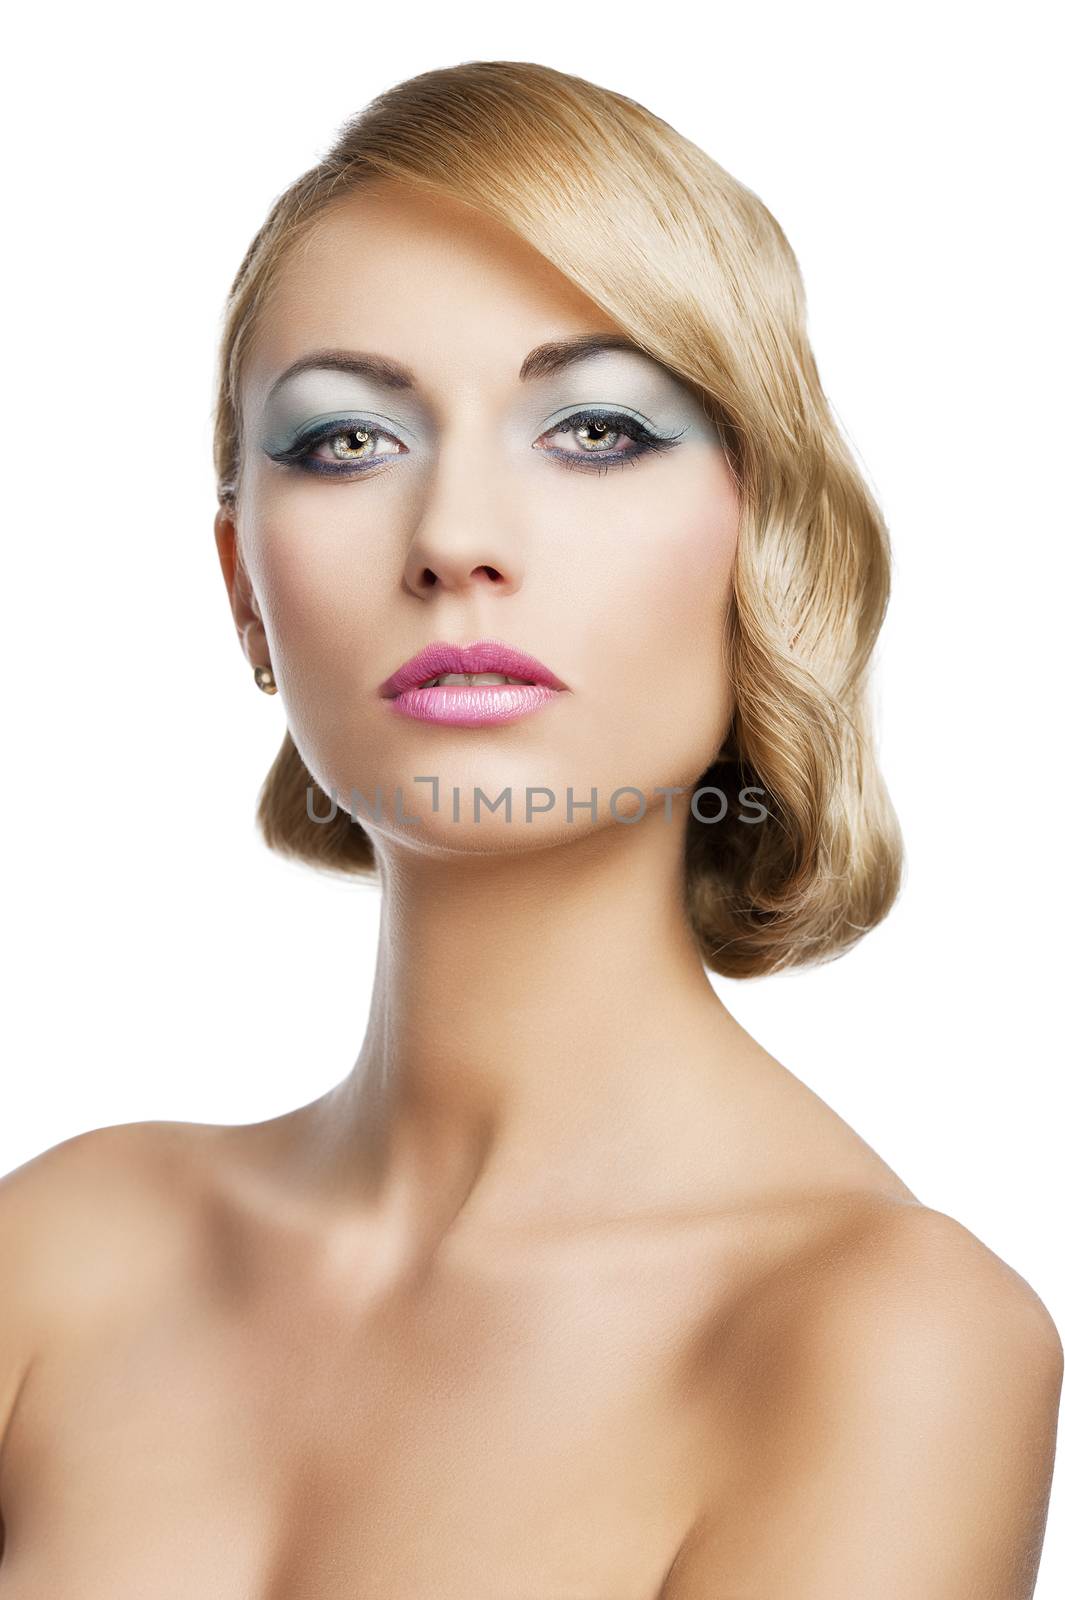 blond beautiful woman with strong make up and an old fashion hair stylish in beauty portrait close up. She is in front of the camera and looks in to the lens with mouth slightly open.